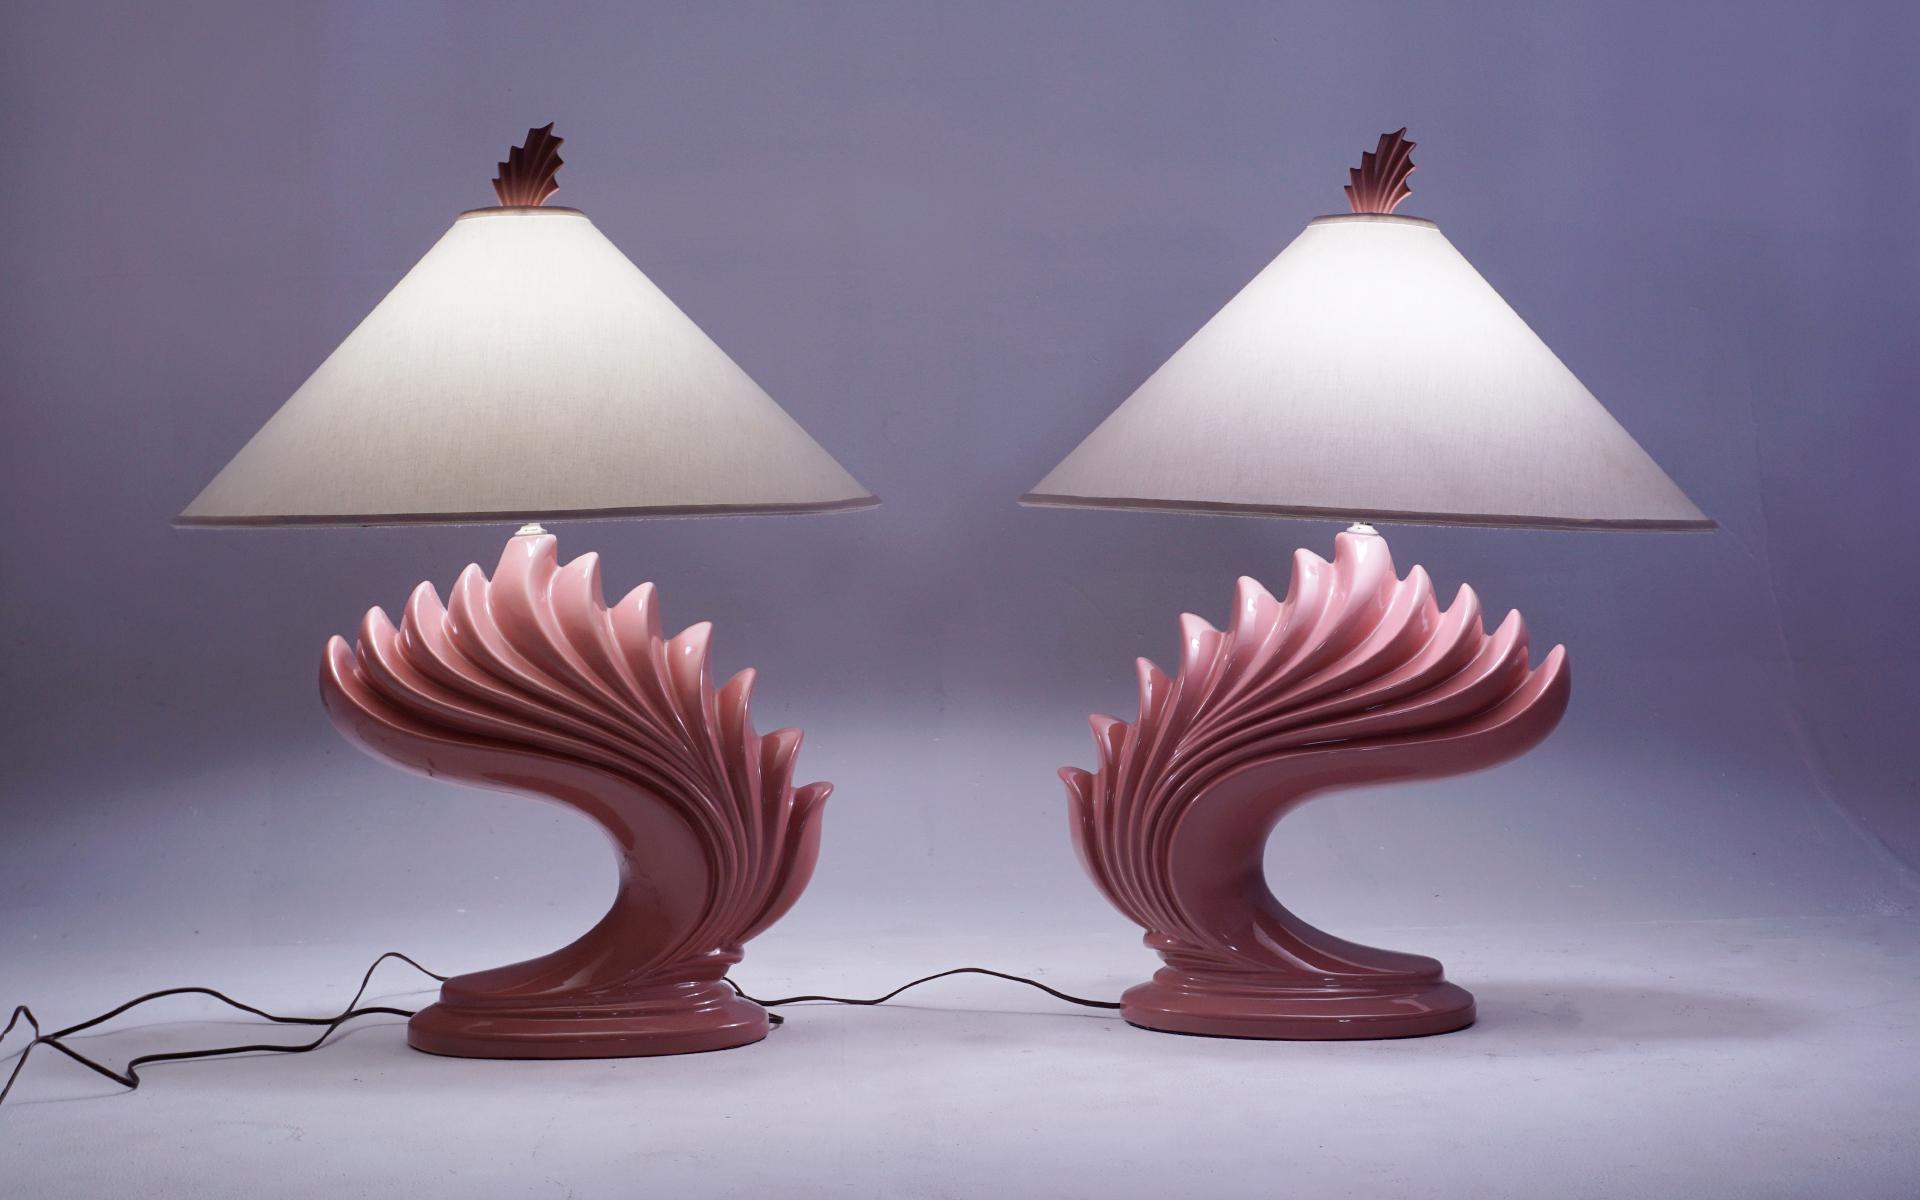 Hollywood Regency Large Pair 1970s Ceramic Table Lamps, Original Finials & Shades, Coral  / Pink For Sale